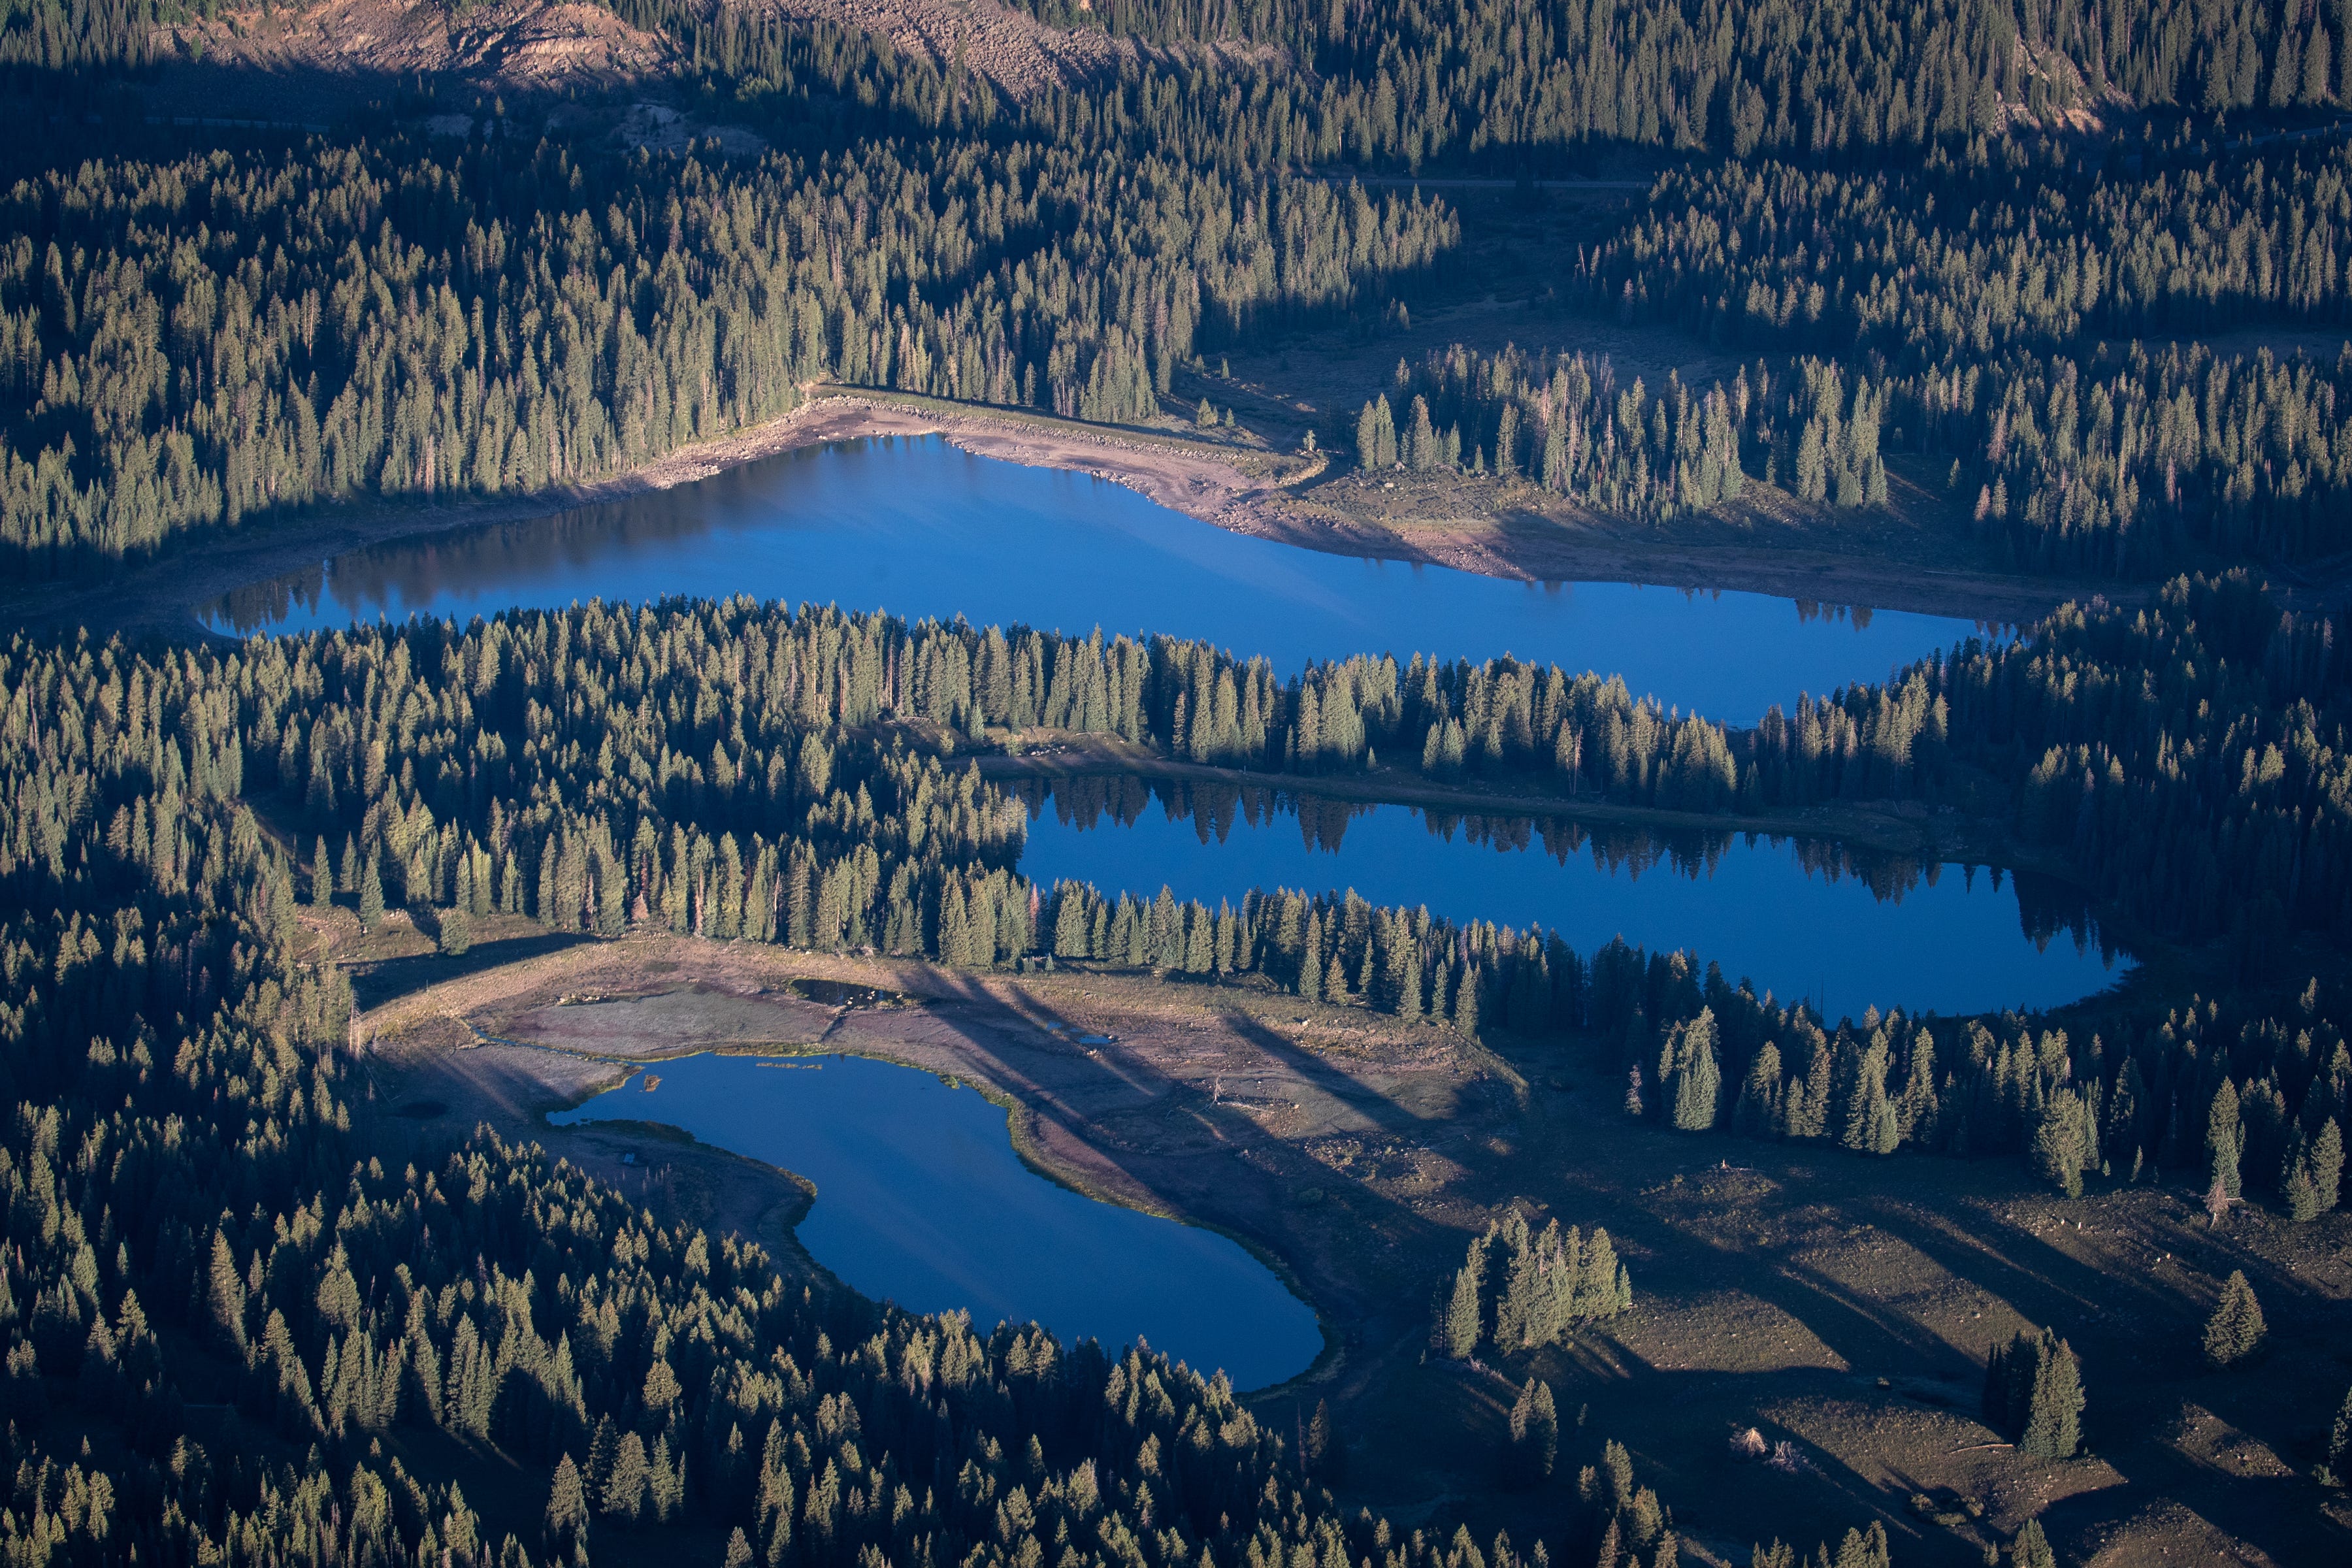 A few of the many reservoirs in the Grand Mesa National Forest. While the lakes hold back snowmelt, almost none of it flows naturally to the river system below. The Forest Service allows these structures to withhold water for irrigation systems downstream. Aerial photography support provided by LightHawk.